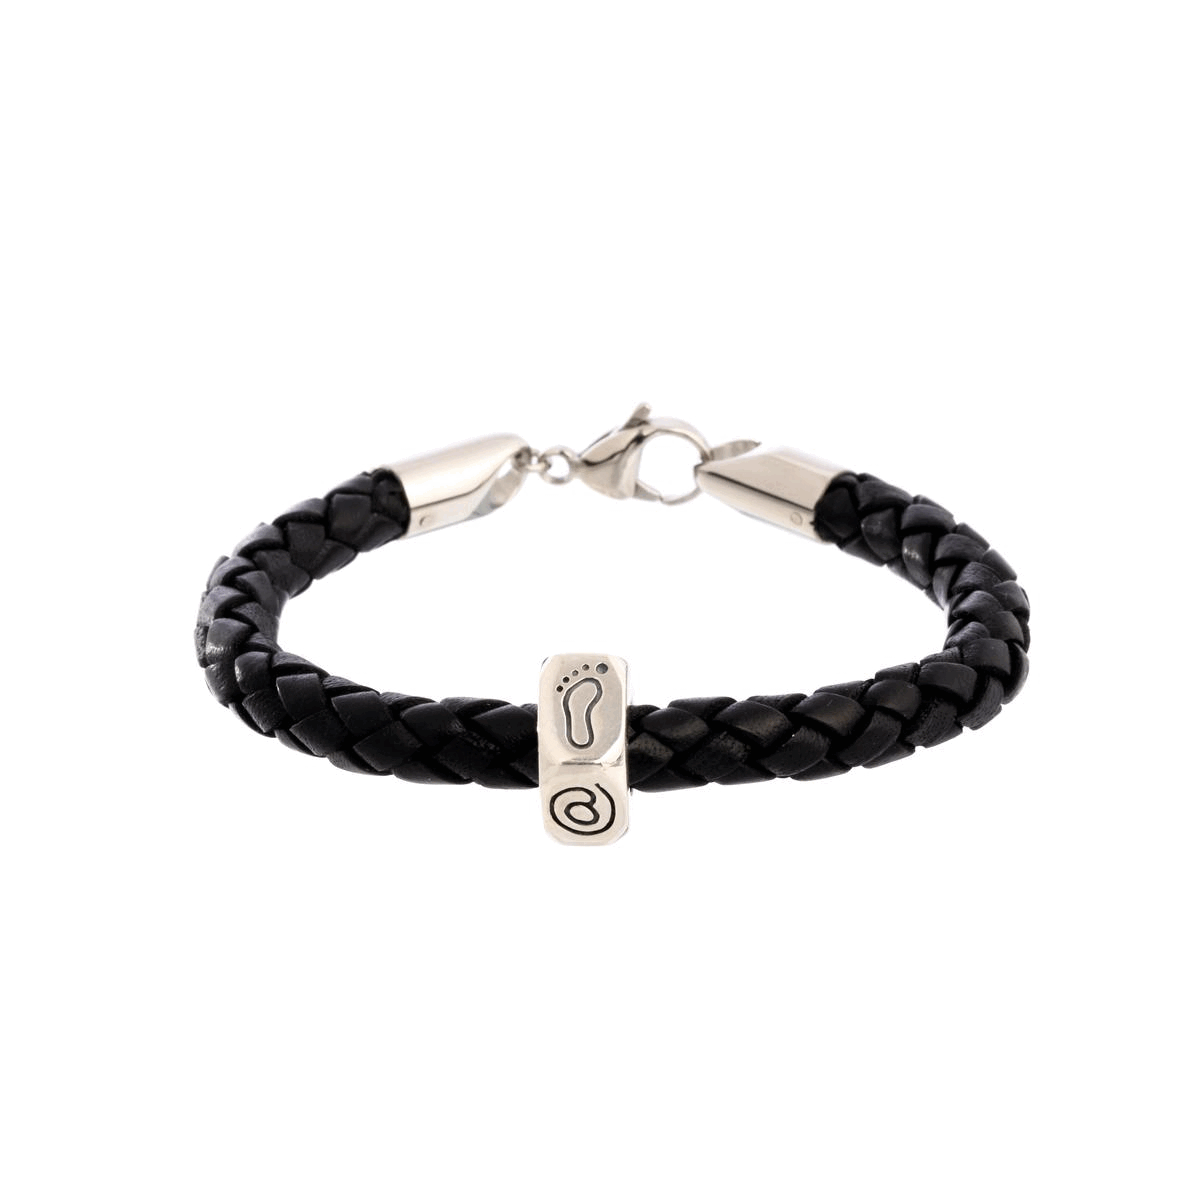 Traveller Charm Mens Leather Silver Charm Bracelet with lucky travel symbols and personalised initials